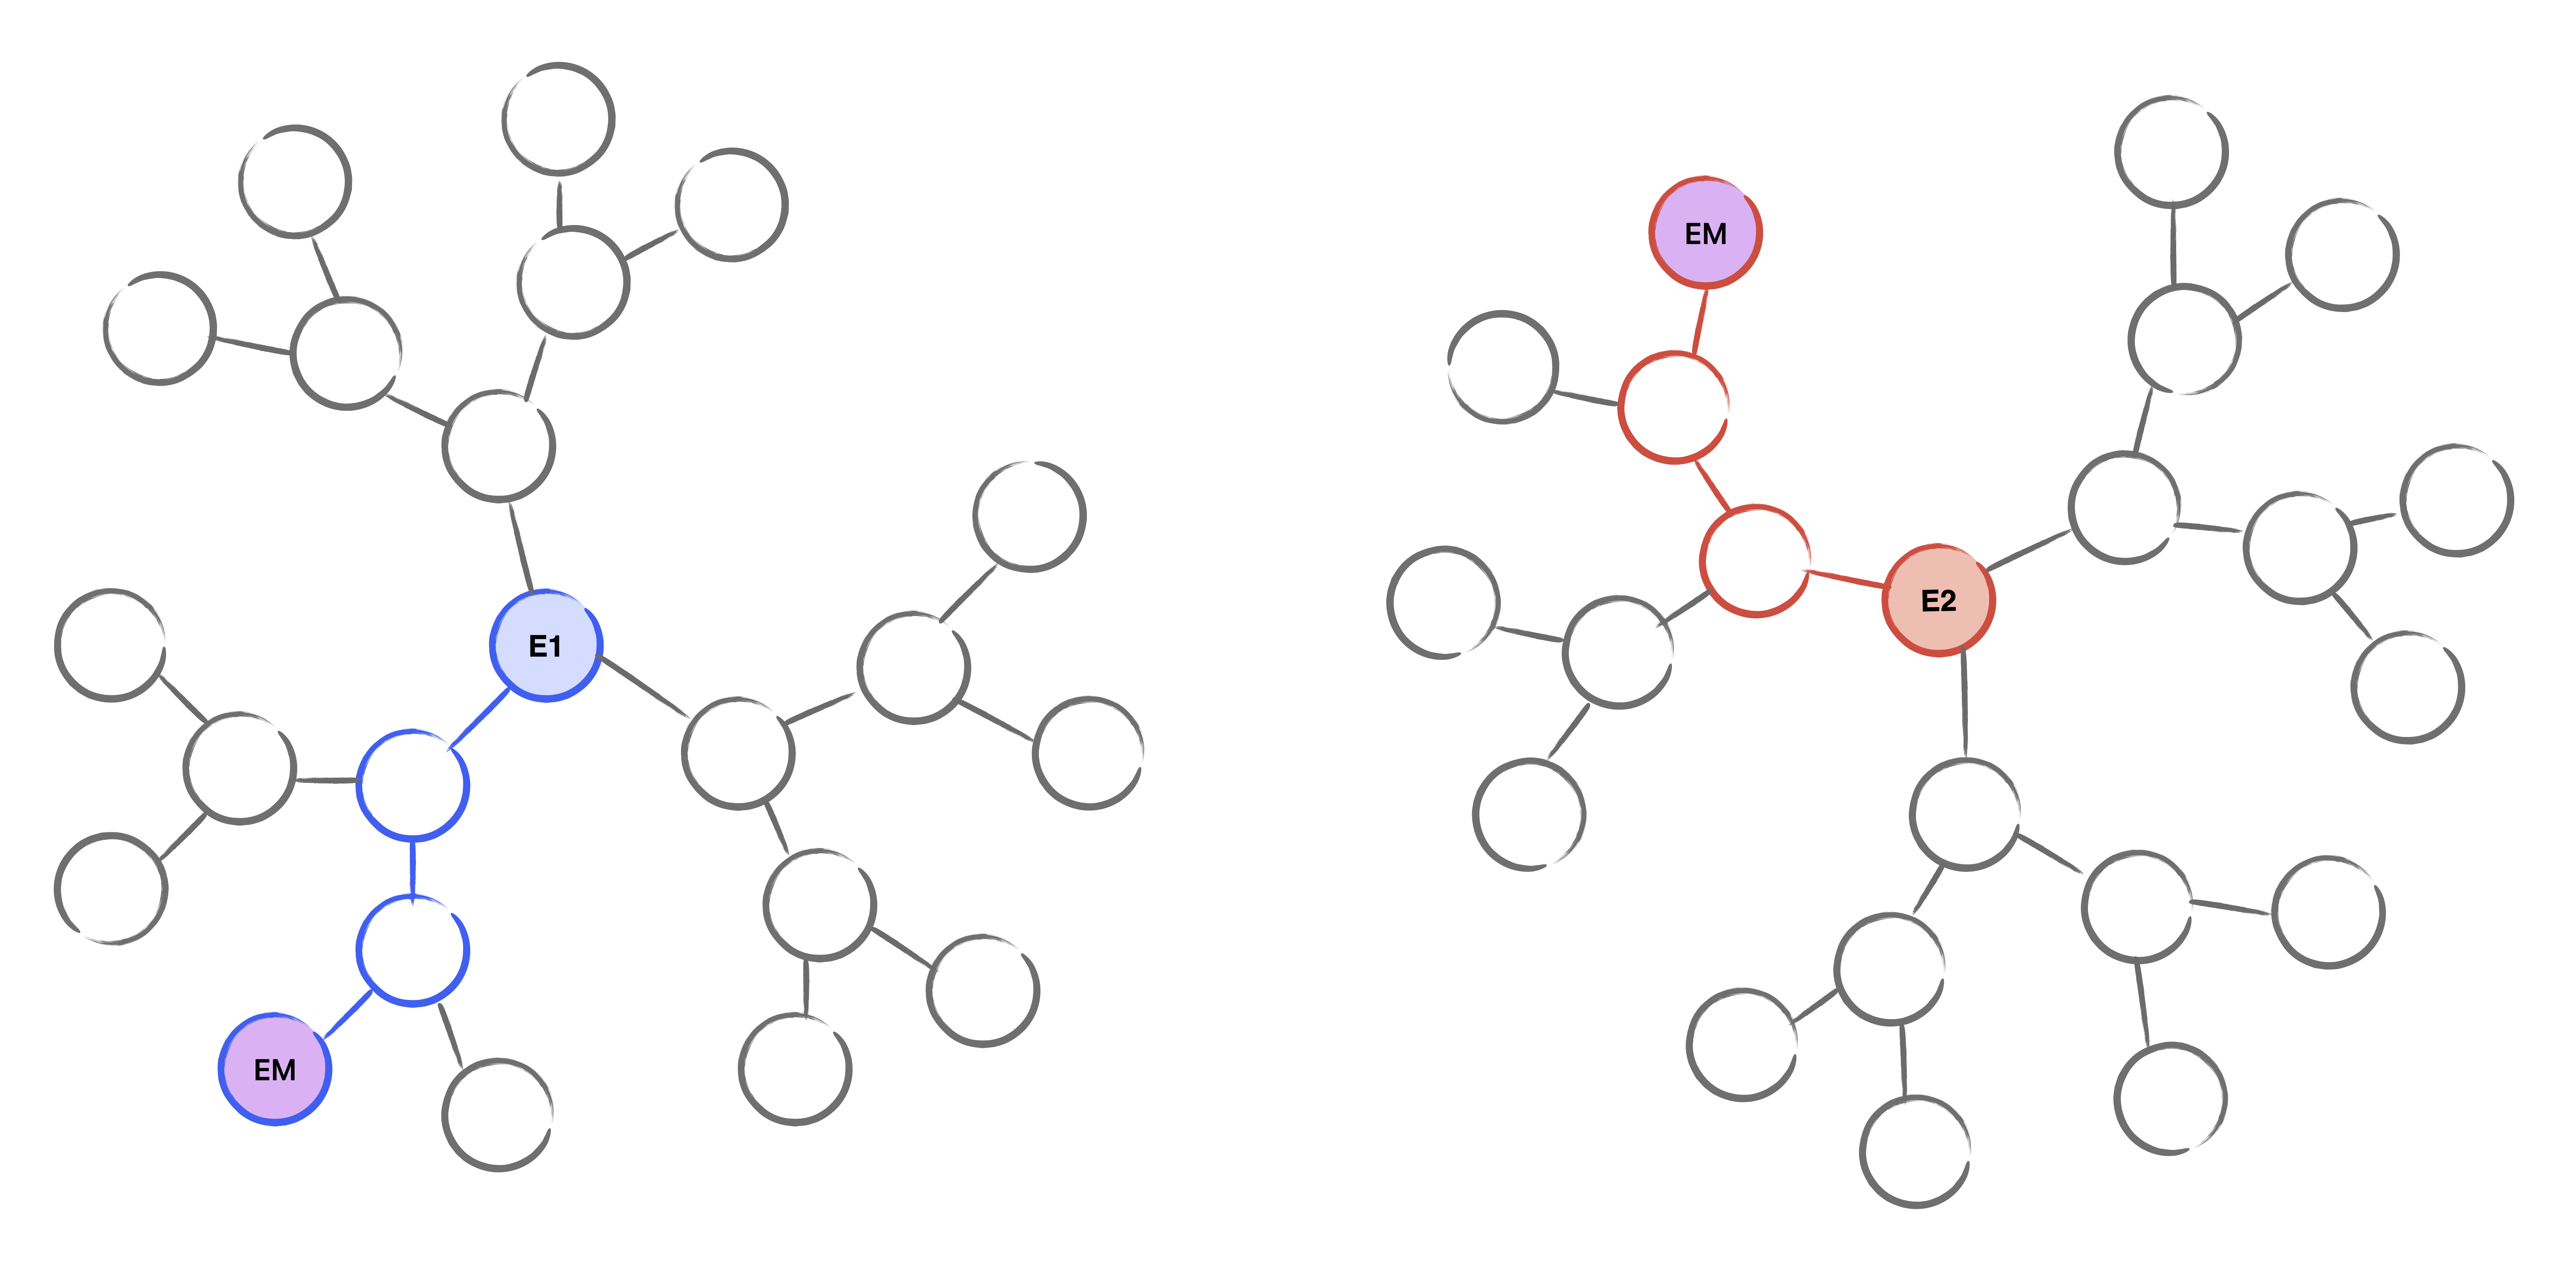 A pair of supersingular isogeny graphs, illustrating how the meet in the middle search works.